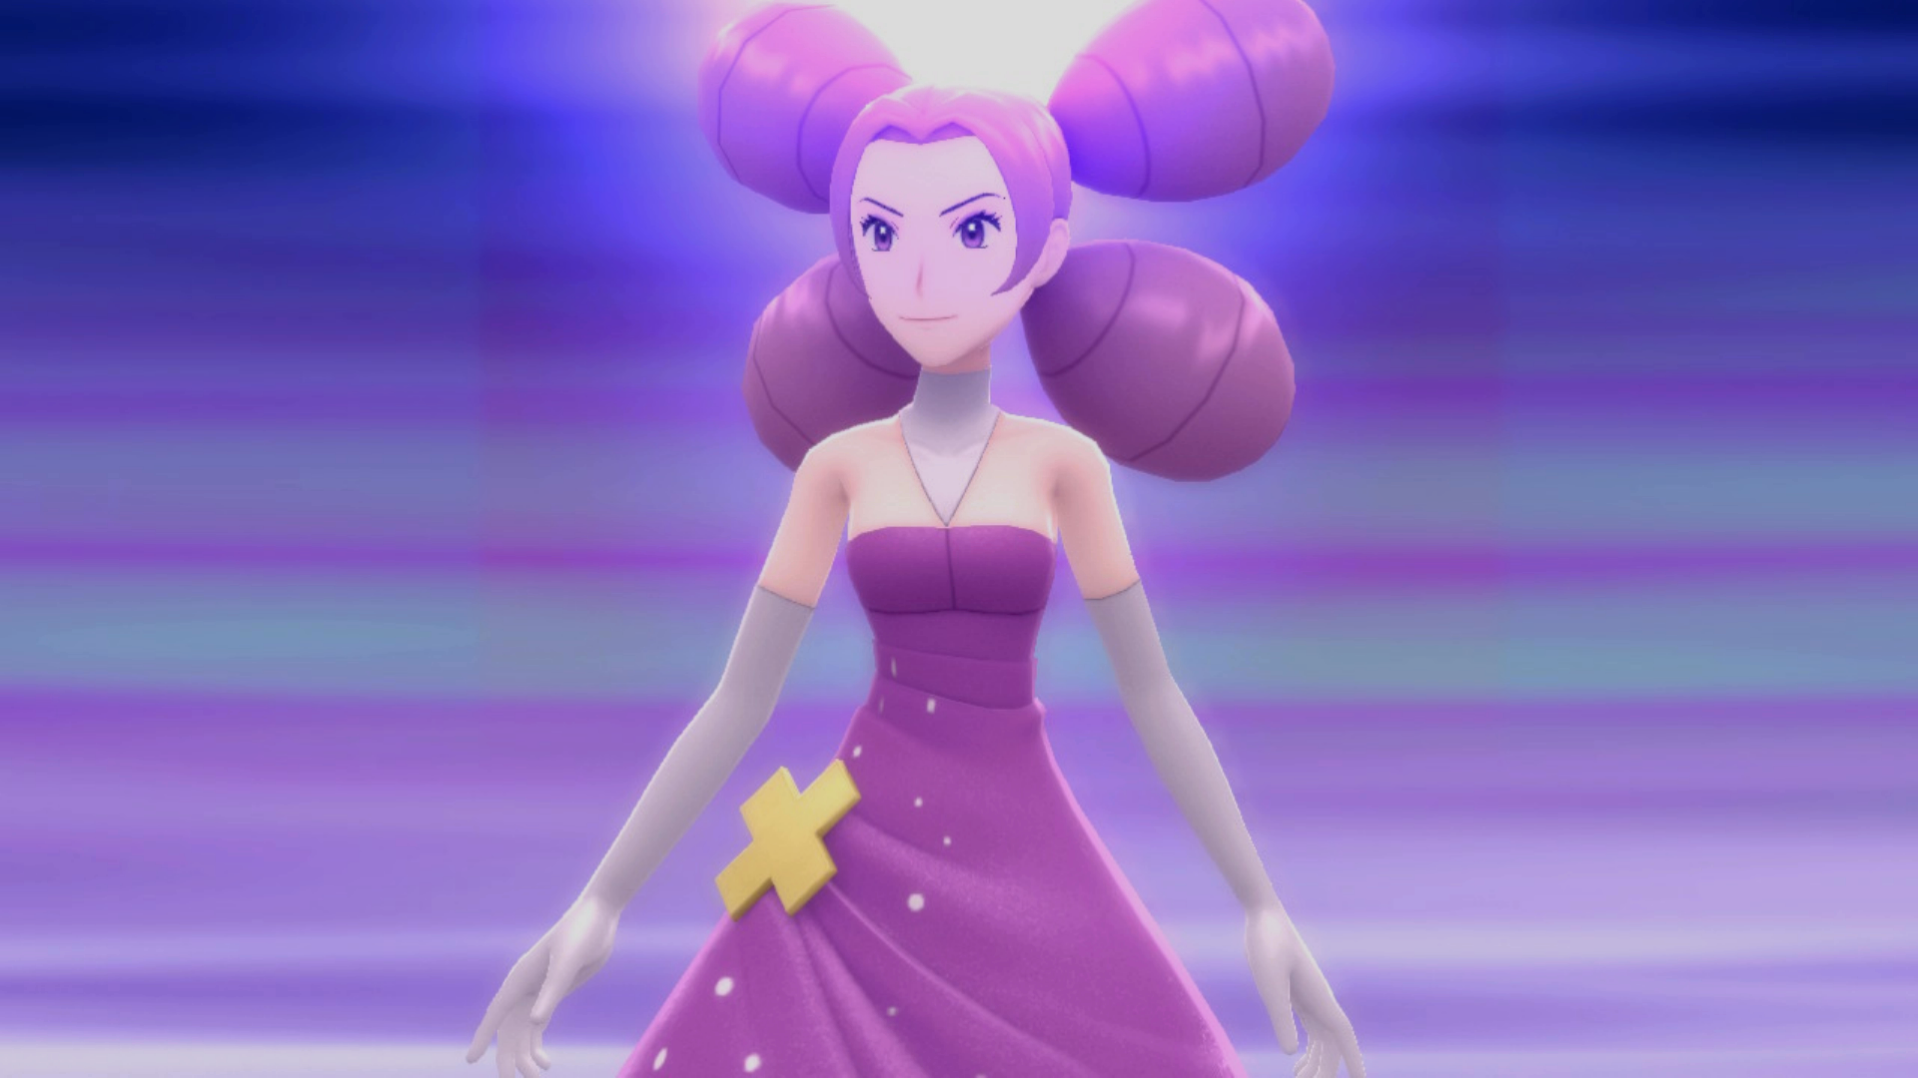 Fantina, as she appears in Pokémon Brilliant Diamond and Shining Pearl